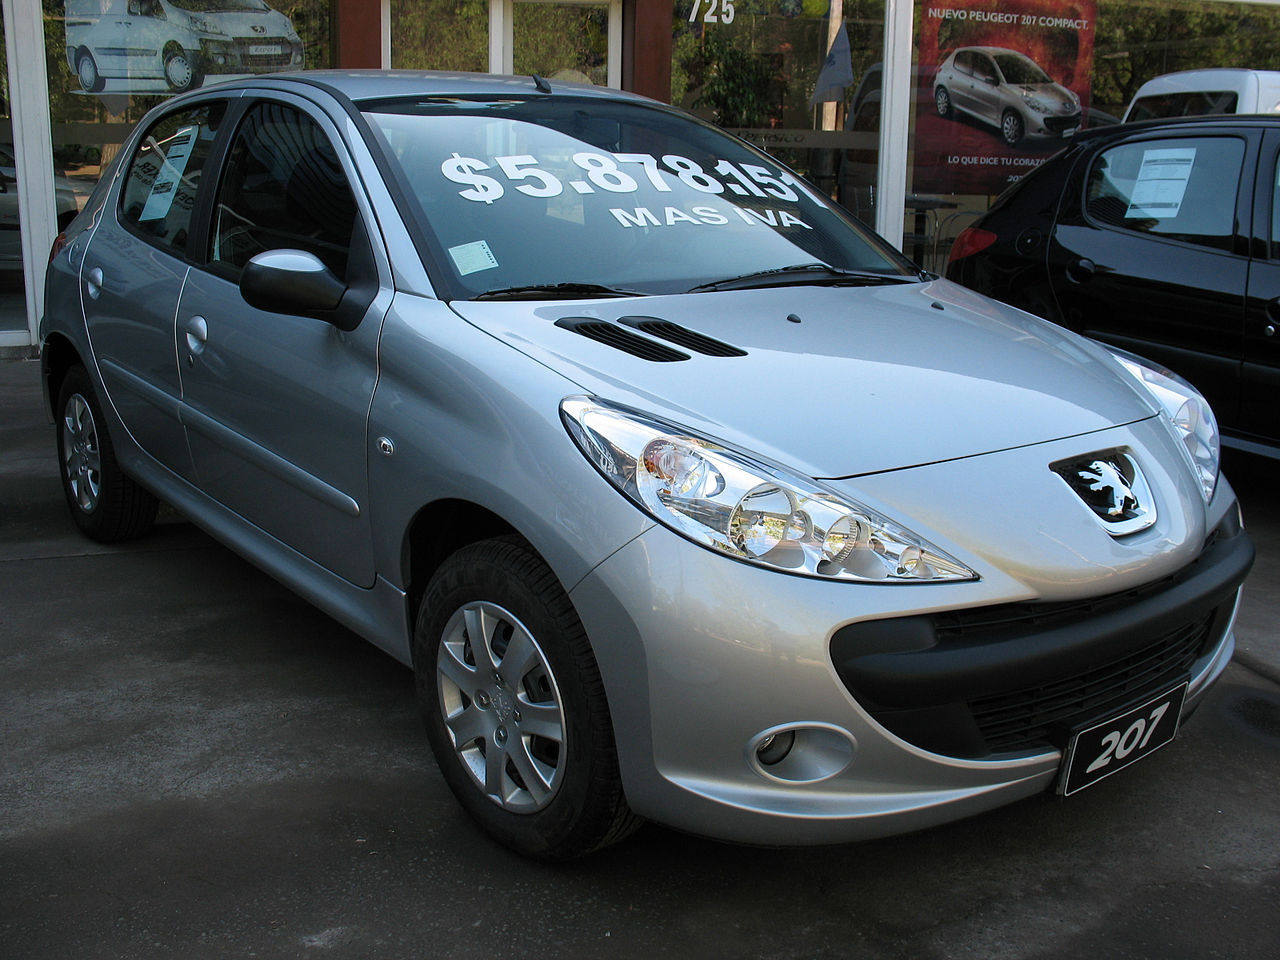 Category:Peugeot 207 Compact - Wikimedia Commons